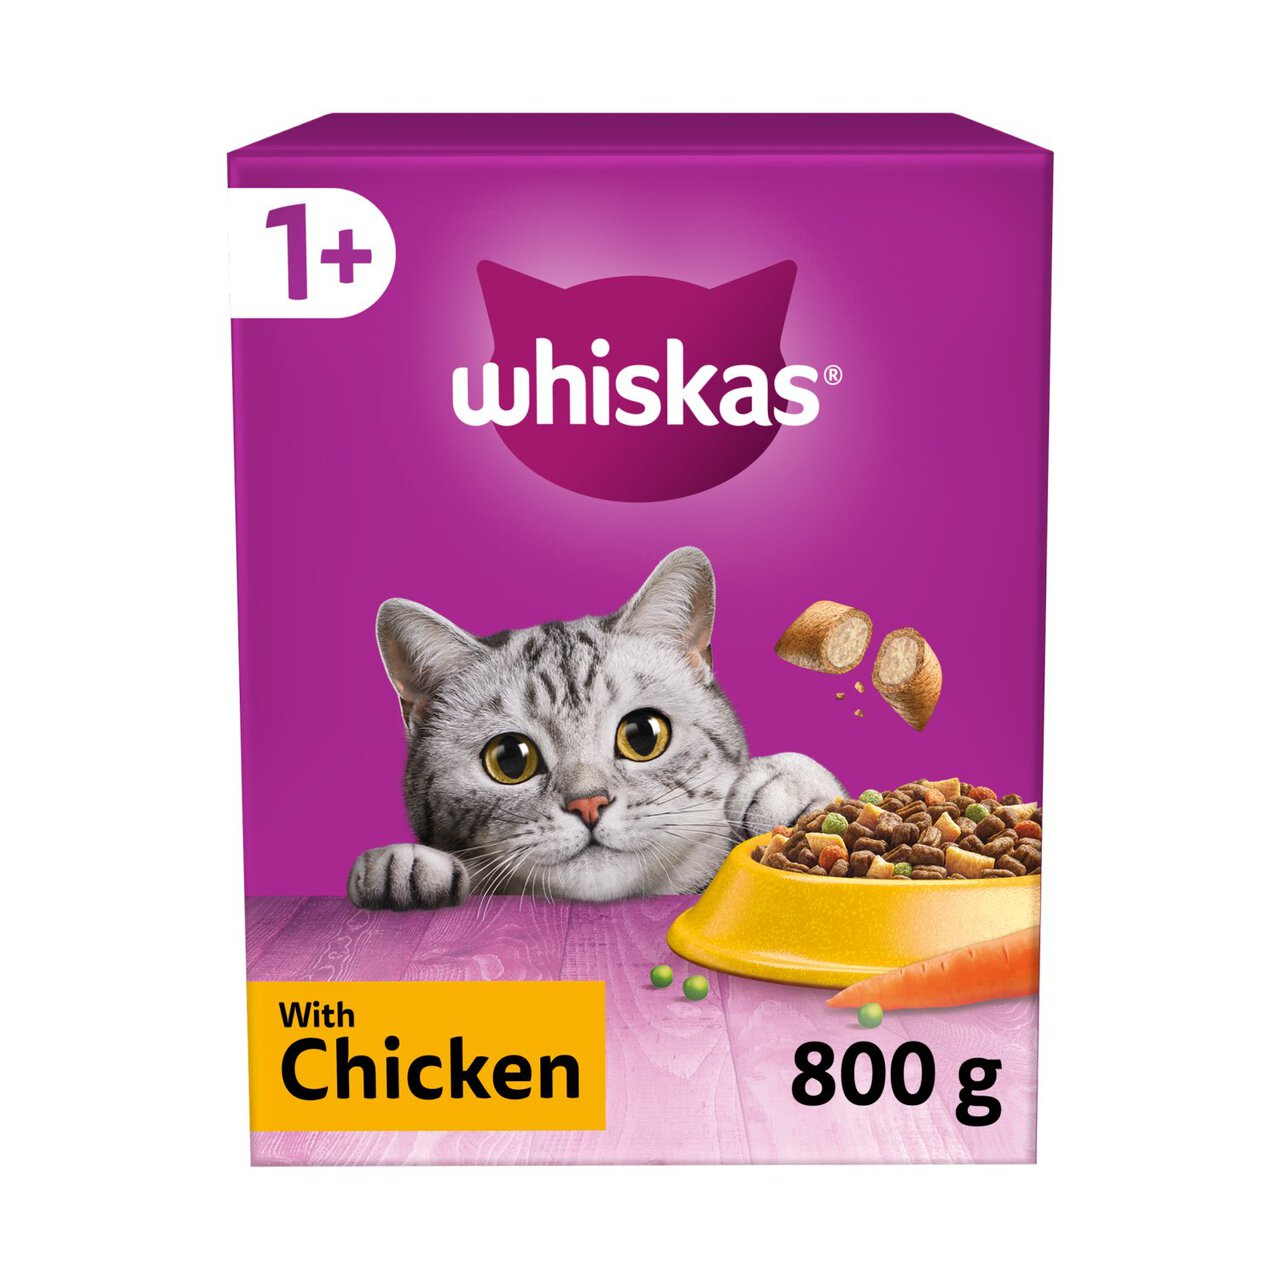 Whiskas 1+ Adult Dry Cat Food with Chicken 800g